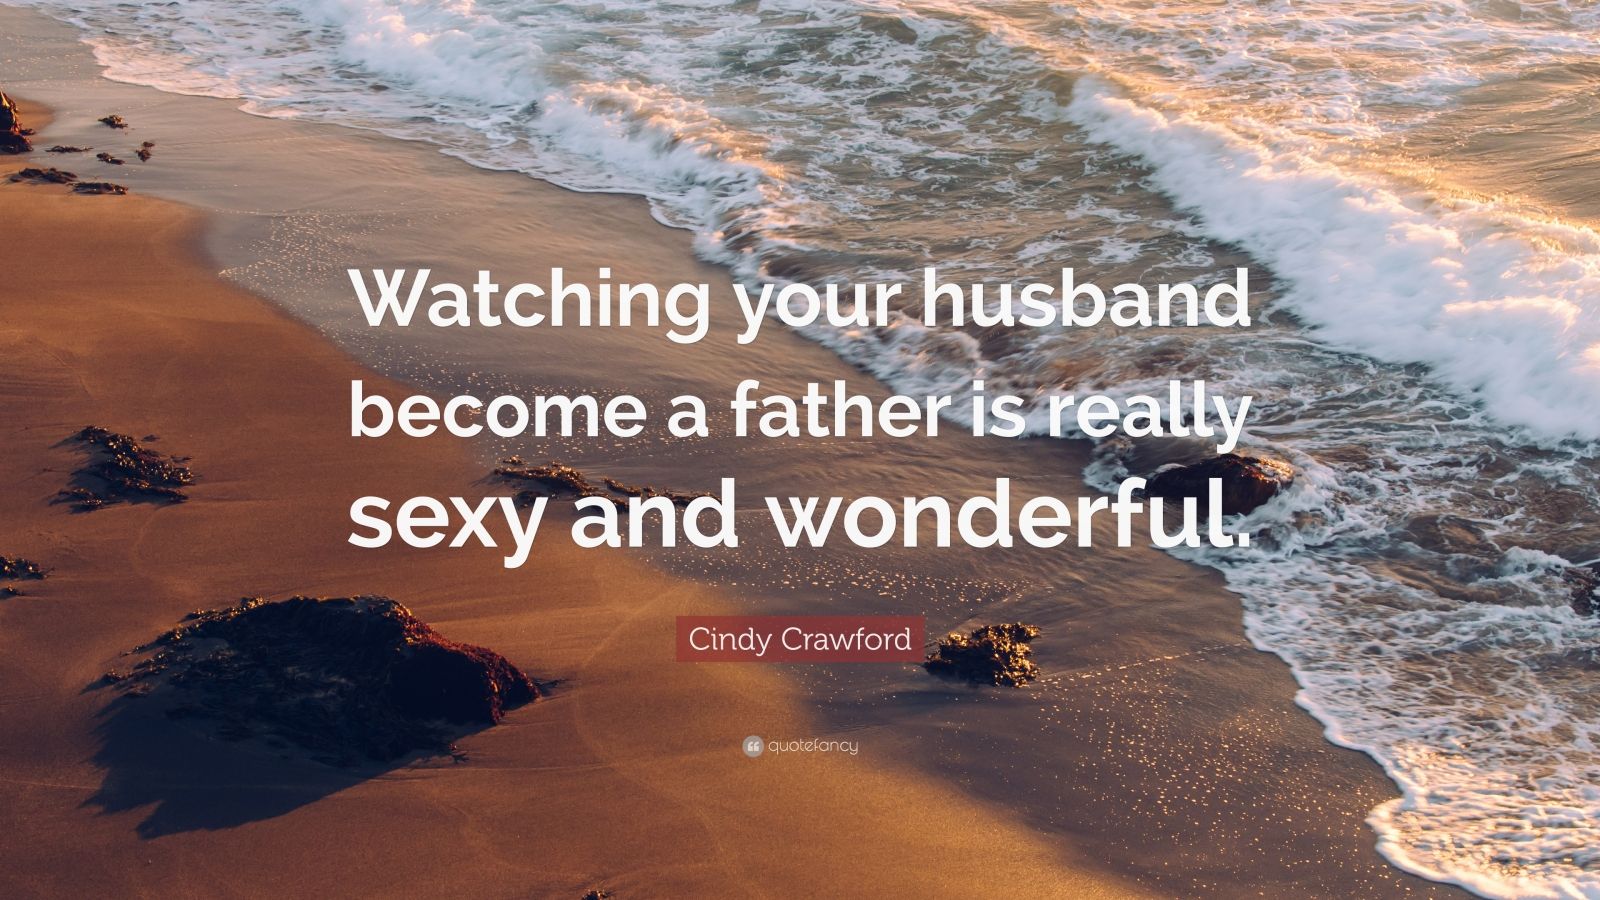 Cindy Crawford Quote: "Watching your husband become a ...